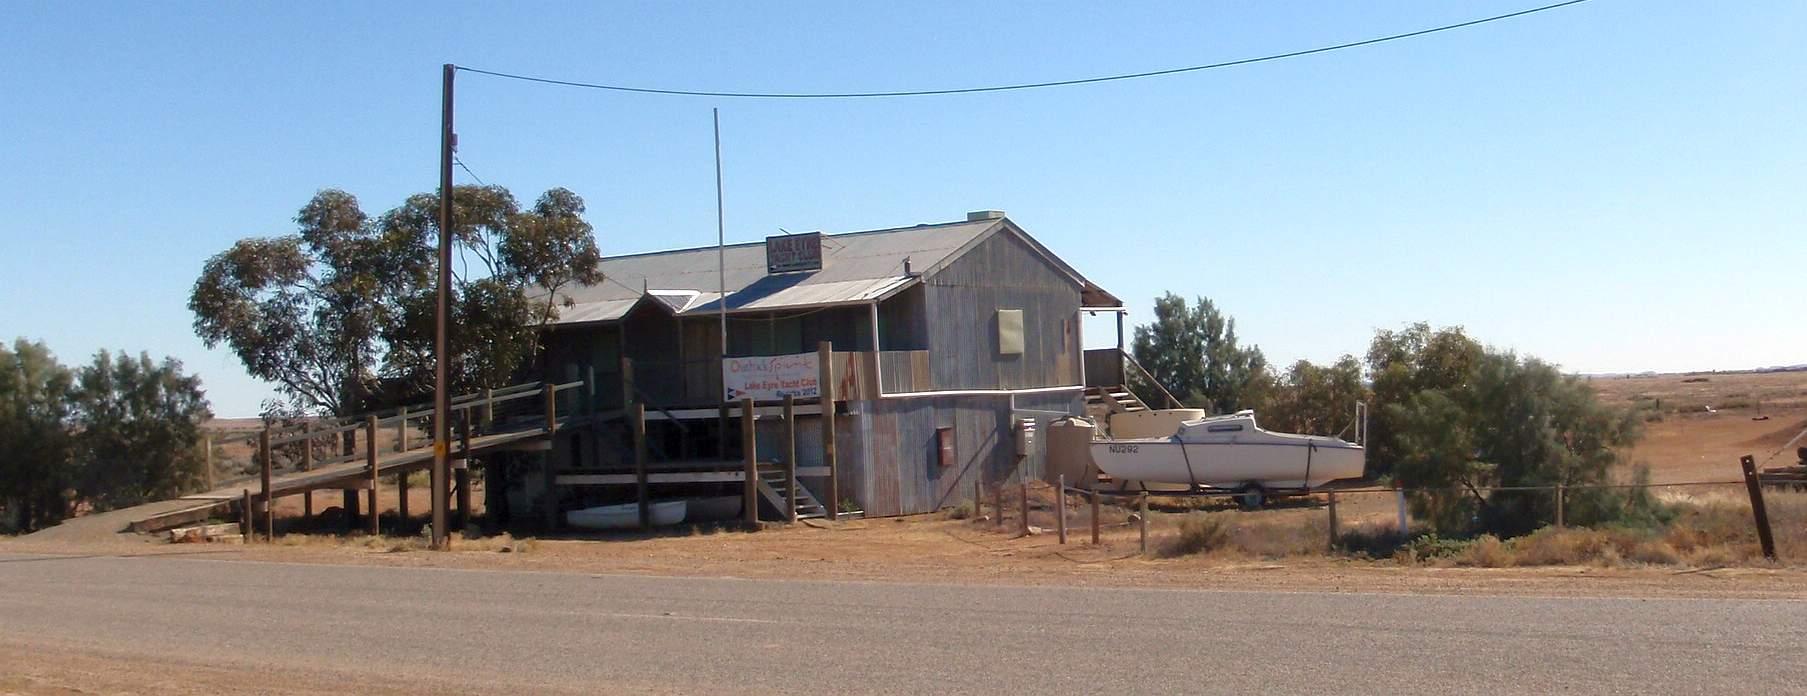 2012-08 Lake E & Adelaide Retr Trip 027.JPG - The one & only Lake Eyre Yacht Club ... no water in sight